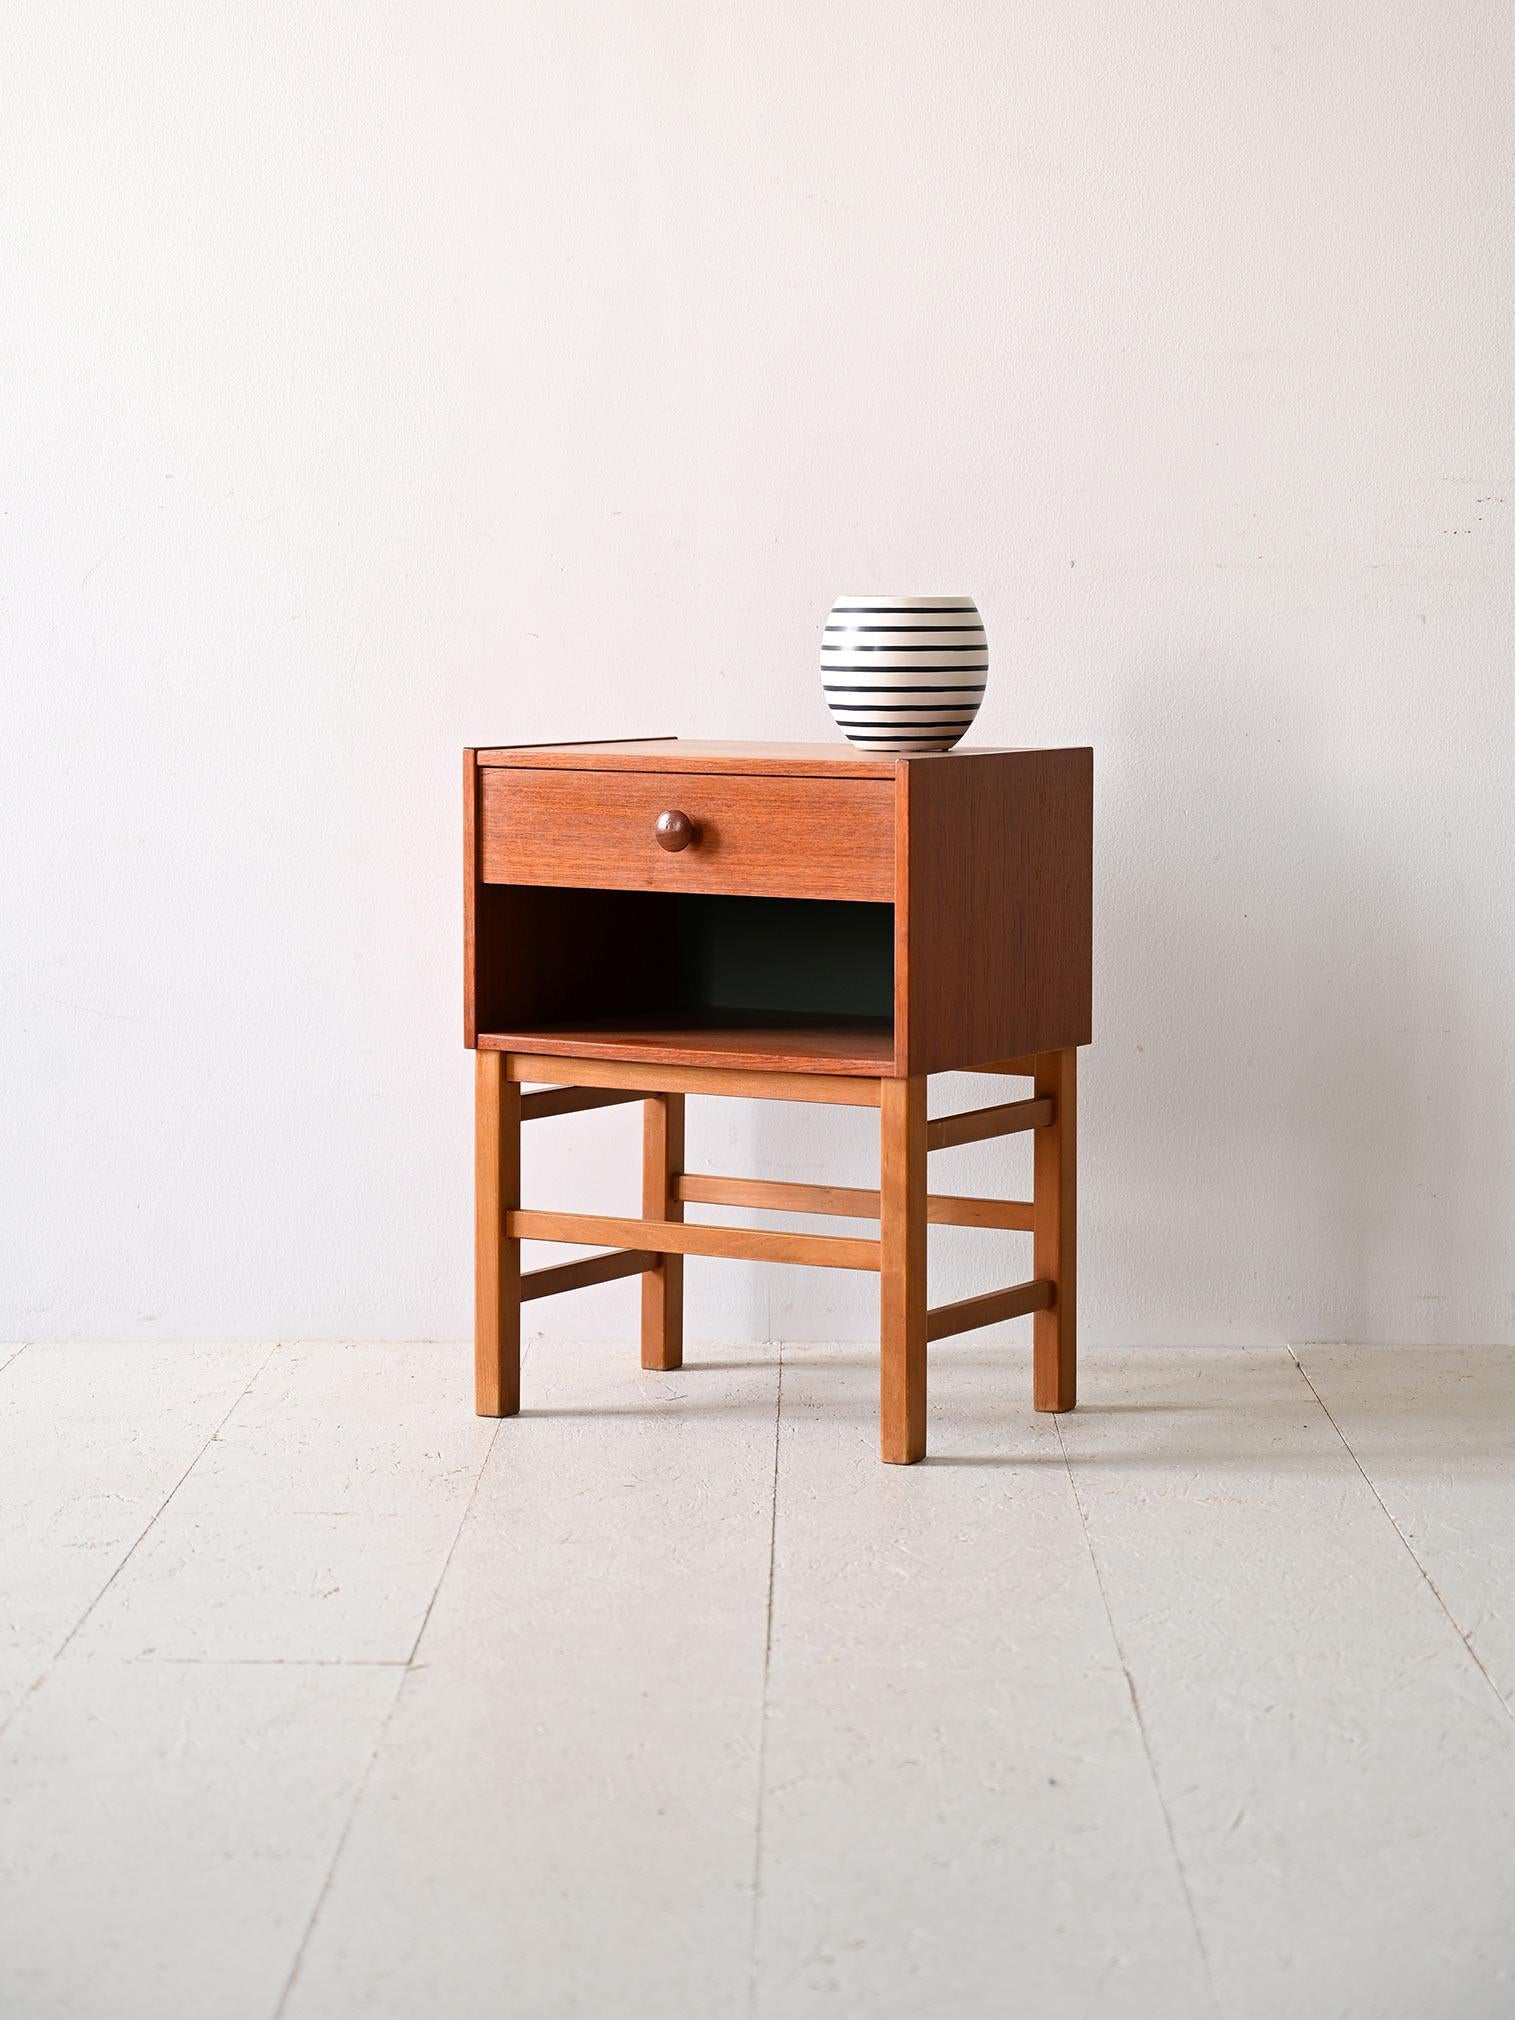 Swedish nightstand from the 1960s with drawer.

This compact nightstand not only stands out for its minimalist shape, but also offers maximum functionality with its large shelf. The drawer, made of teak, adds a touch of warmth and character to the